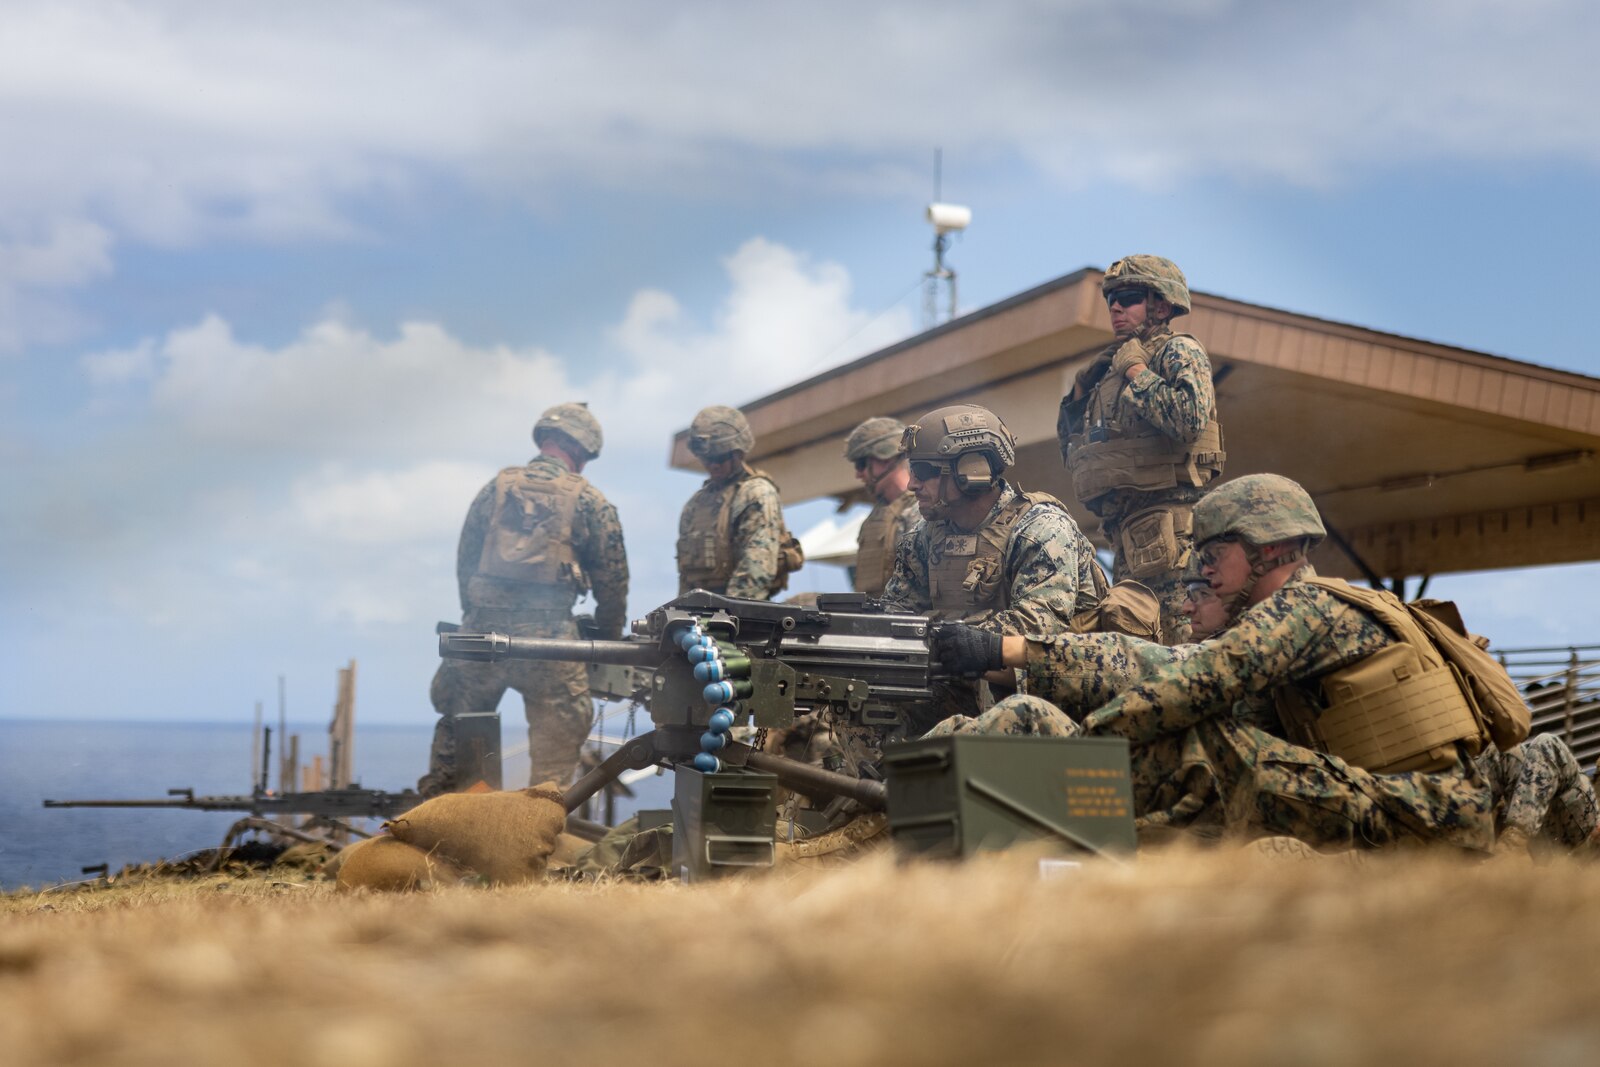 U.S. Marines with 3d Littoral Combat Team, 3d Marine Littoral Regiment, 3d Marine Division, fire Mk 19 grenade launchers during a live fire range at Marine Corps Base Hawaii, August 2, 2023. The purpose of this exercise is to sharpen the LCT’s weapons handling skills and increase their readiness for future exercises and operations. (U.S. Marine Corps photo by Lance Cpl. Malia Sparks)